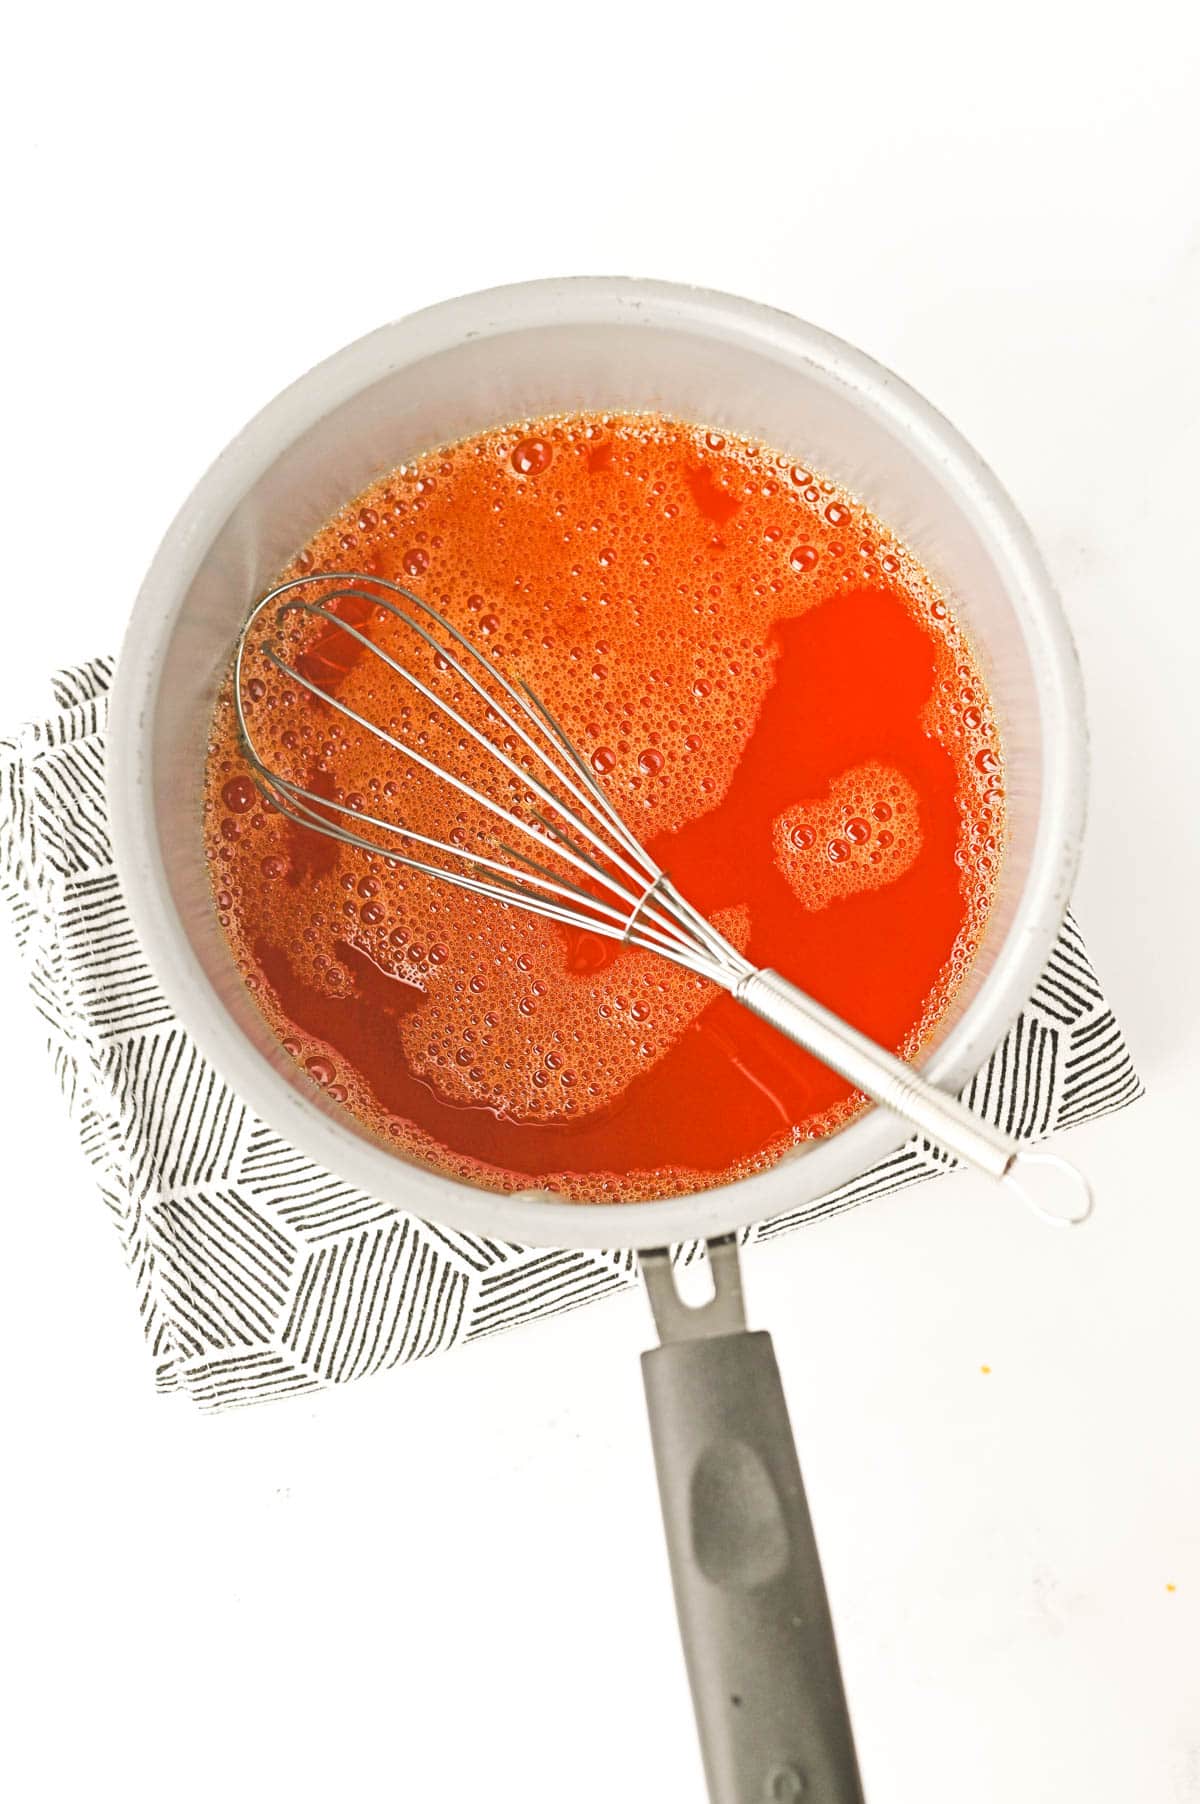 orange jello being whisked in a saucepan